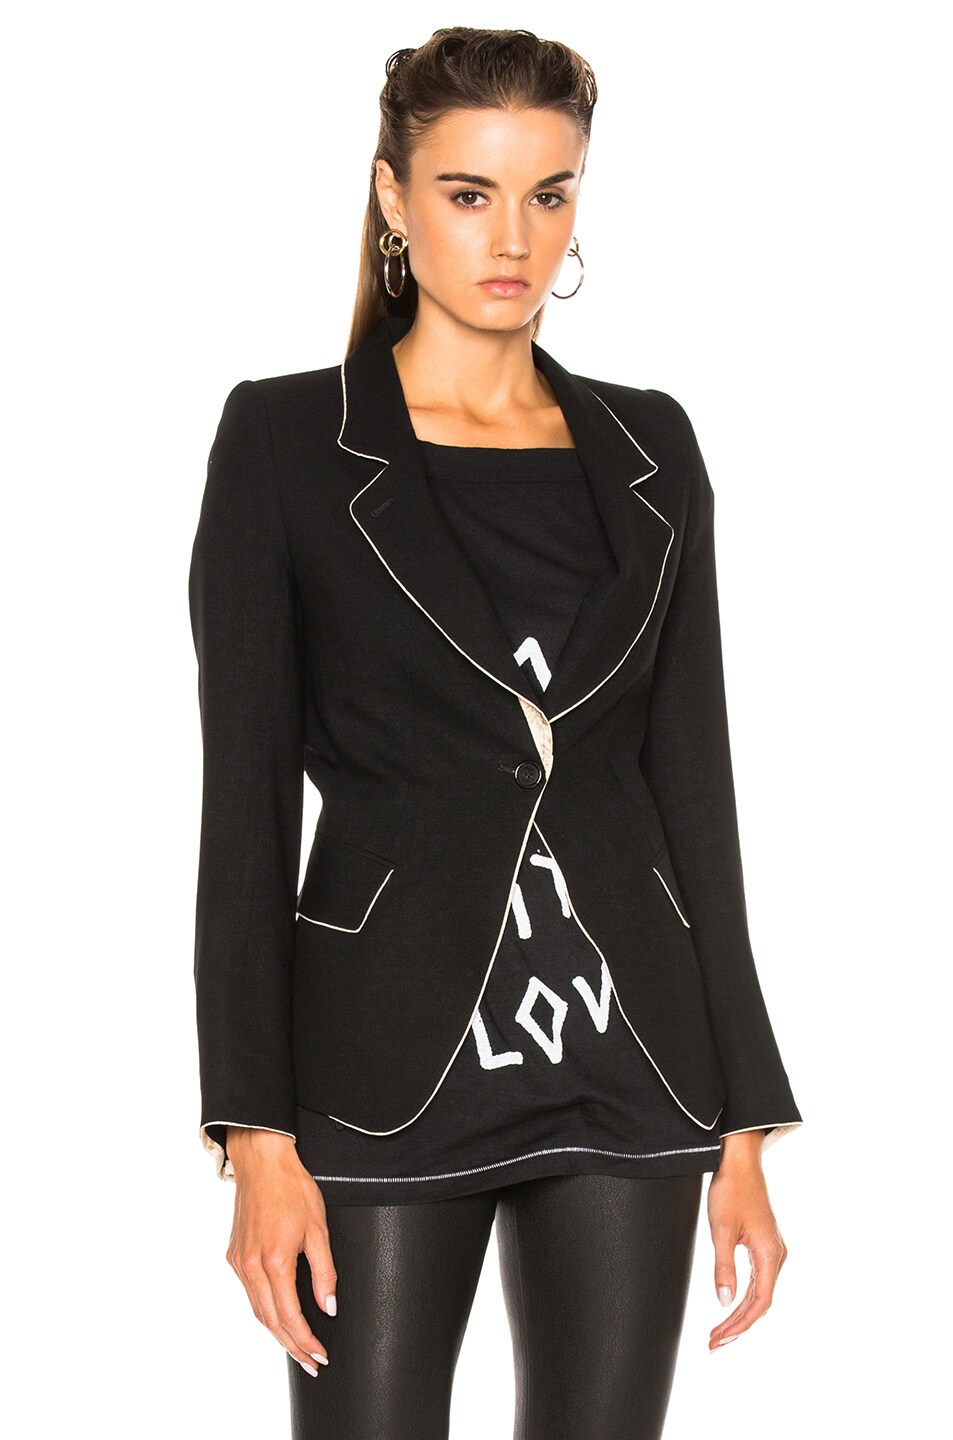 ANN DEMEULEMEESTER BLAZER WITH CONTRASTING PIPING, BLACK & SAND | ModeSens